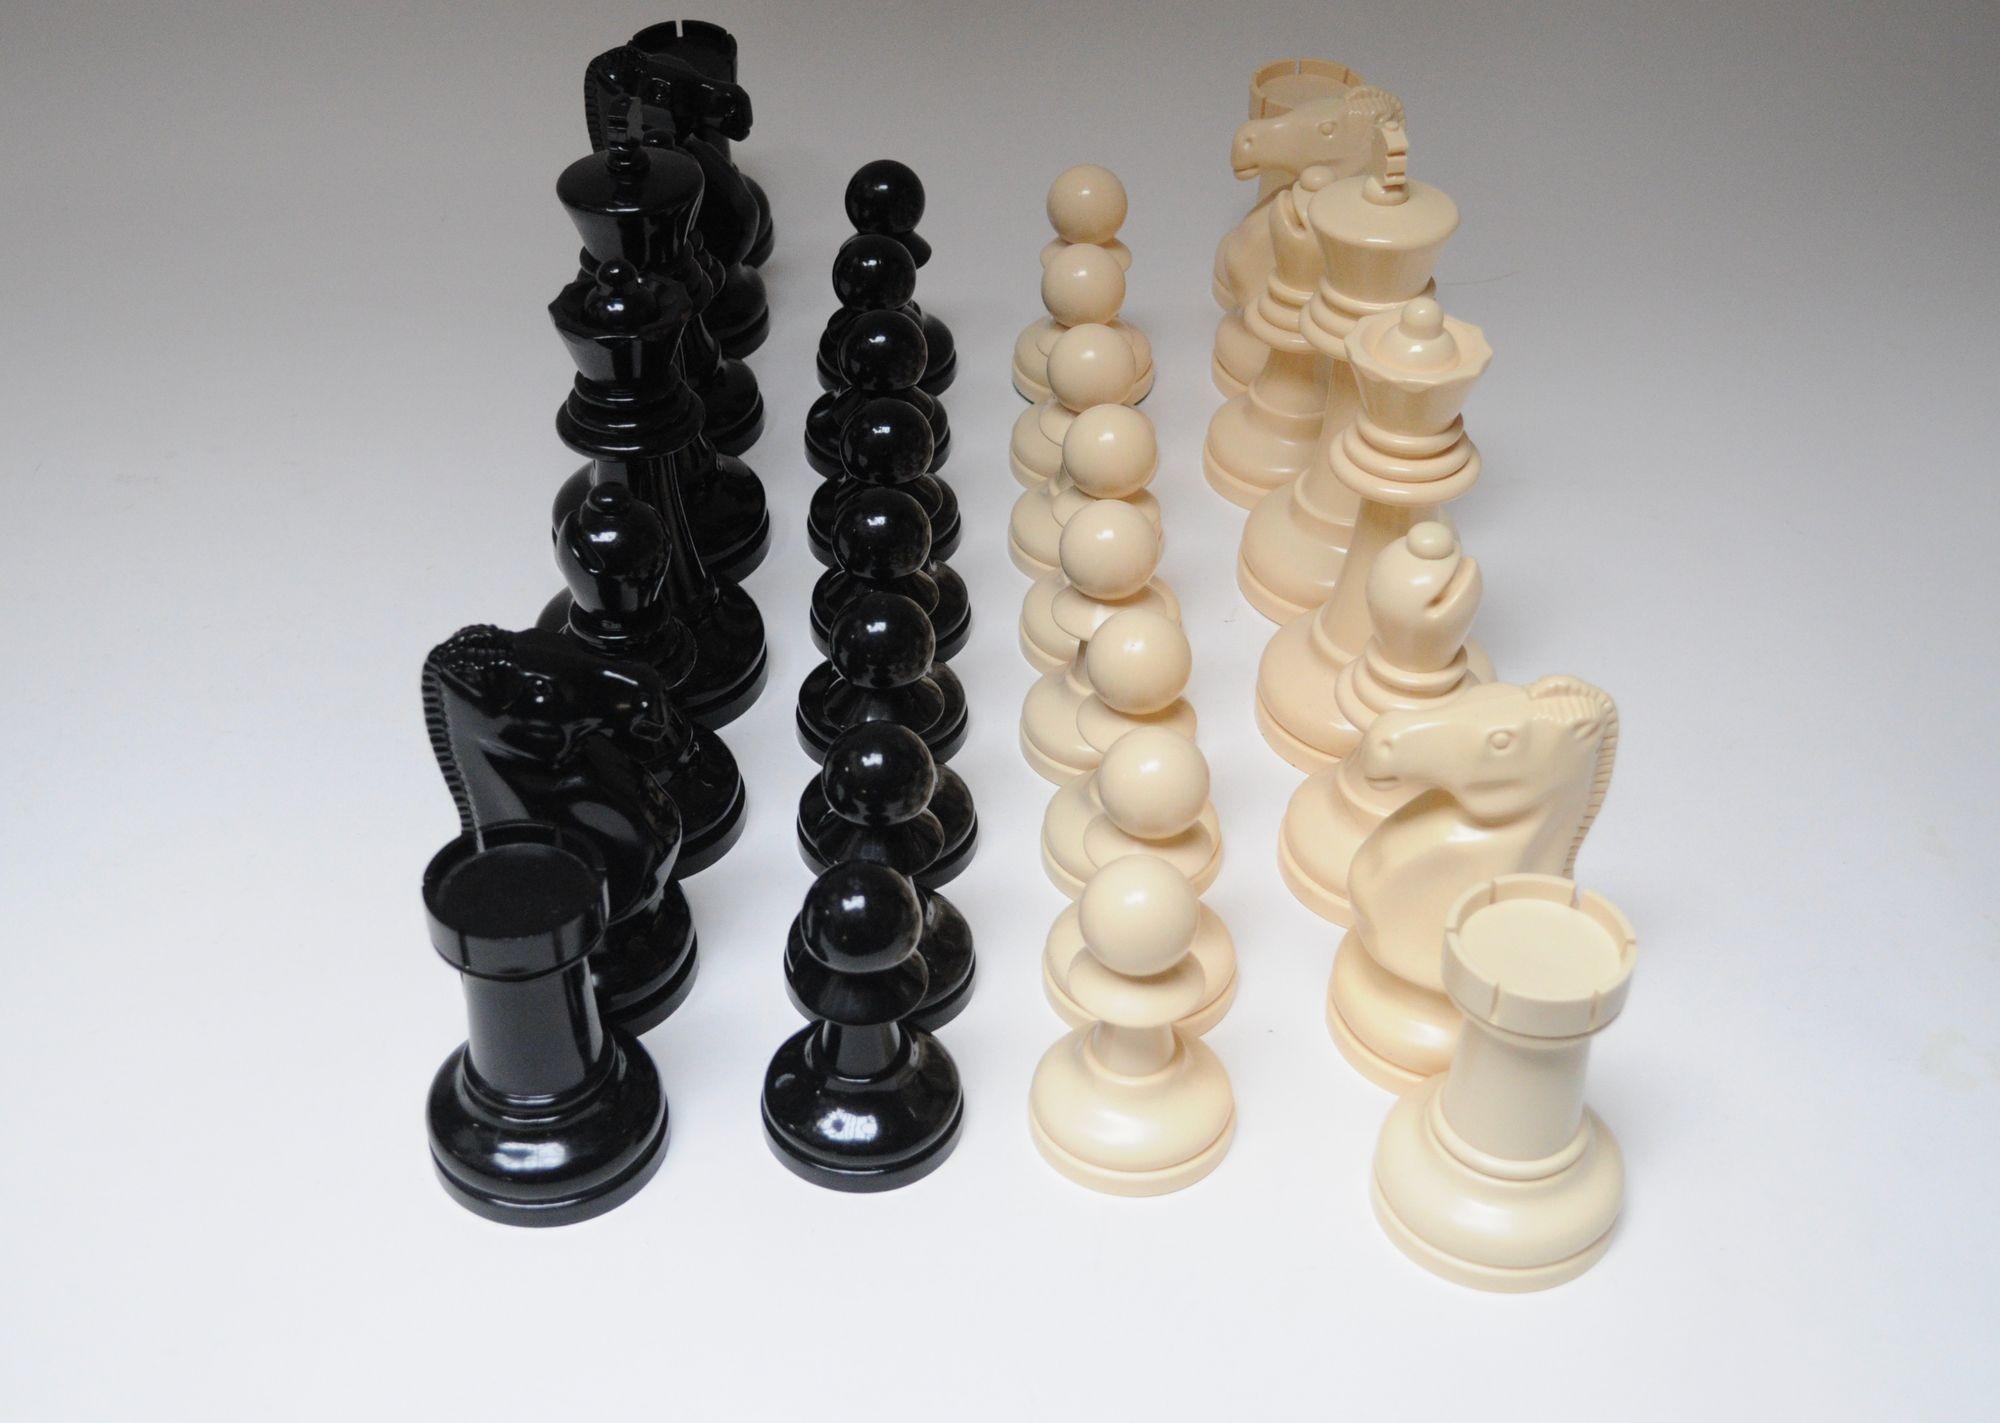 Uniquely large chess pieces in black and cream plastic, ca. 1970s USA.
Full and complete set with no board, though squares would need to be 4